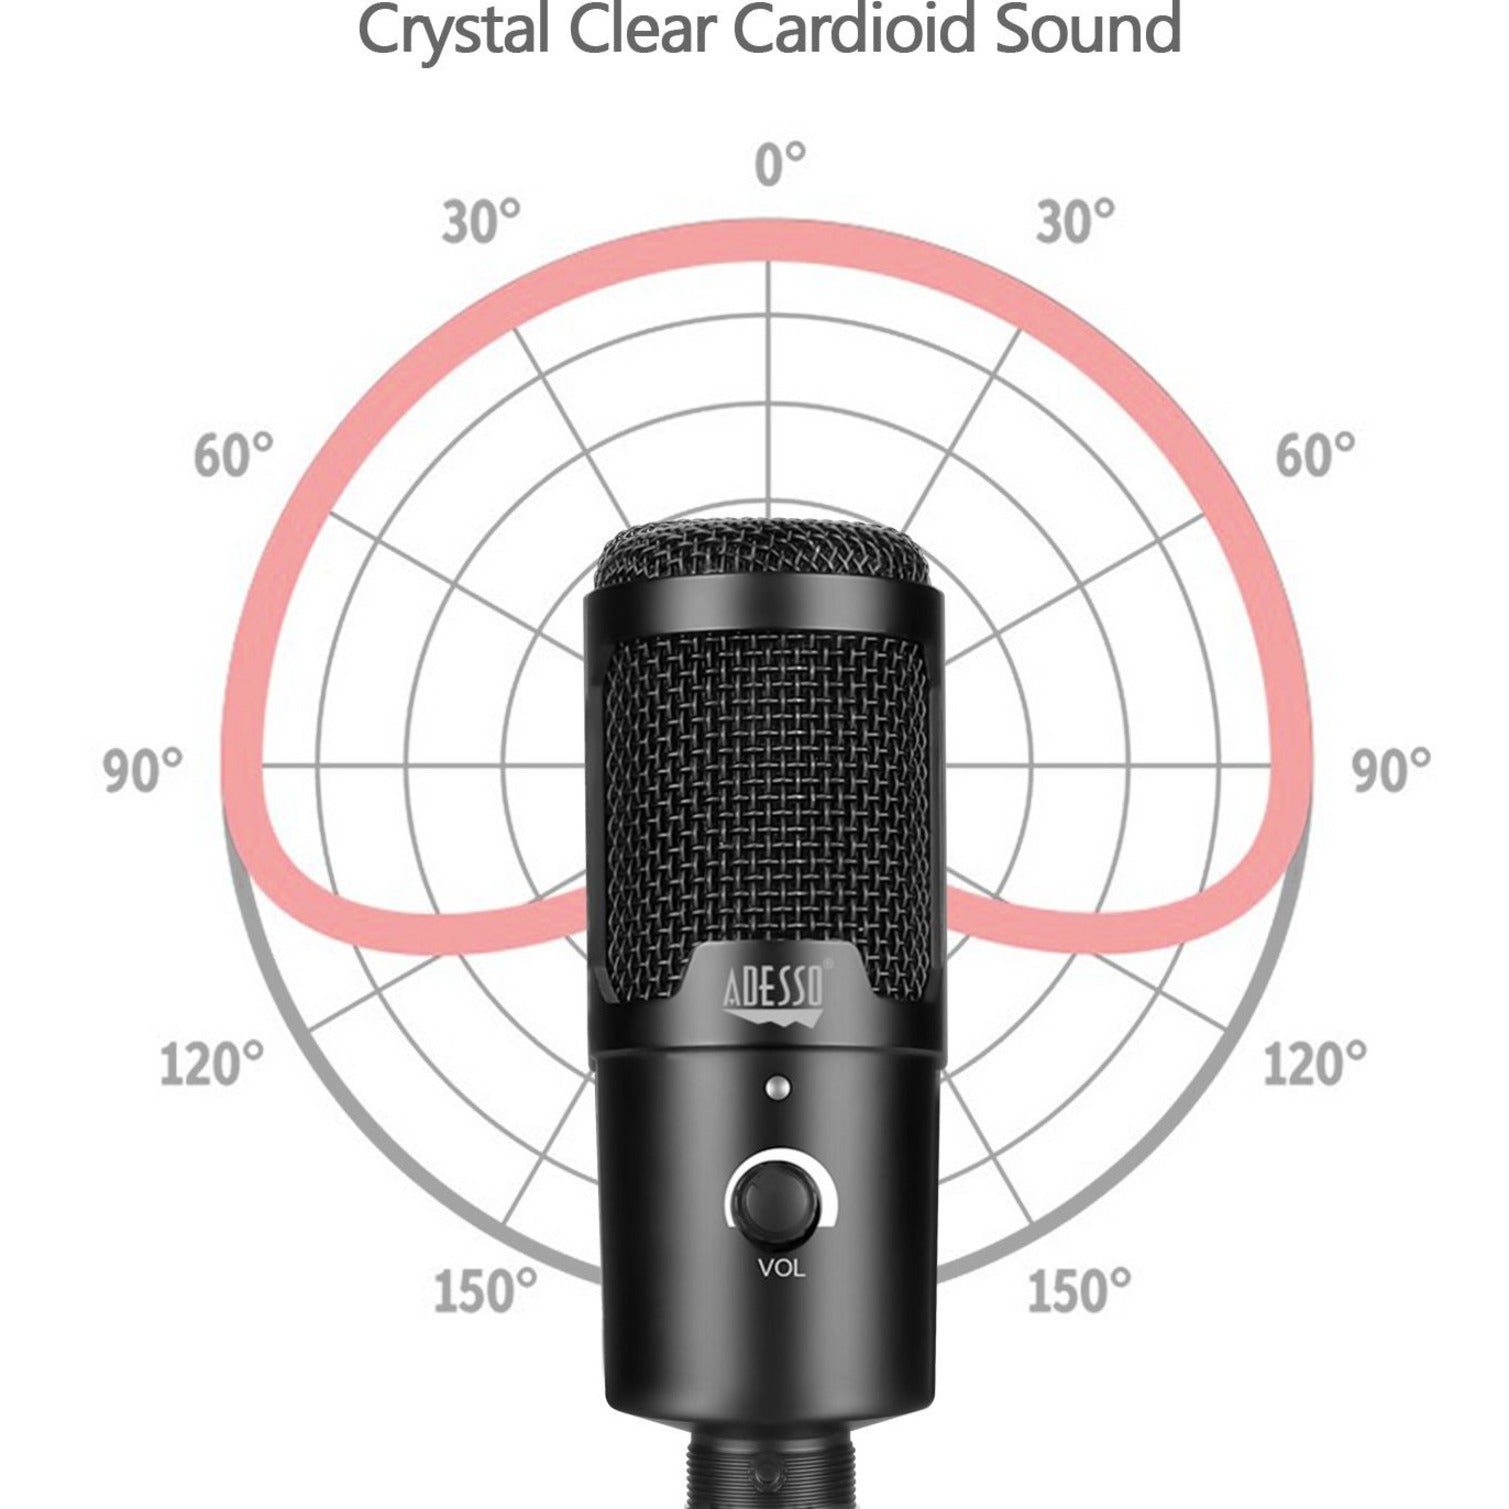 Adesso Xtream M4 Wired Condenser Microphone, Uni-directional Cardioid, USB Connectivity, Volume Control